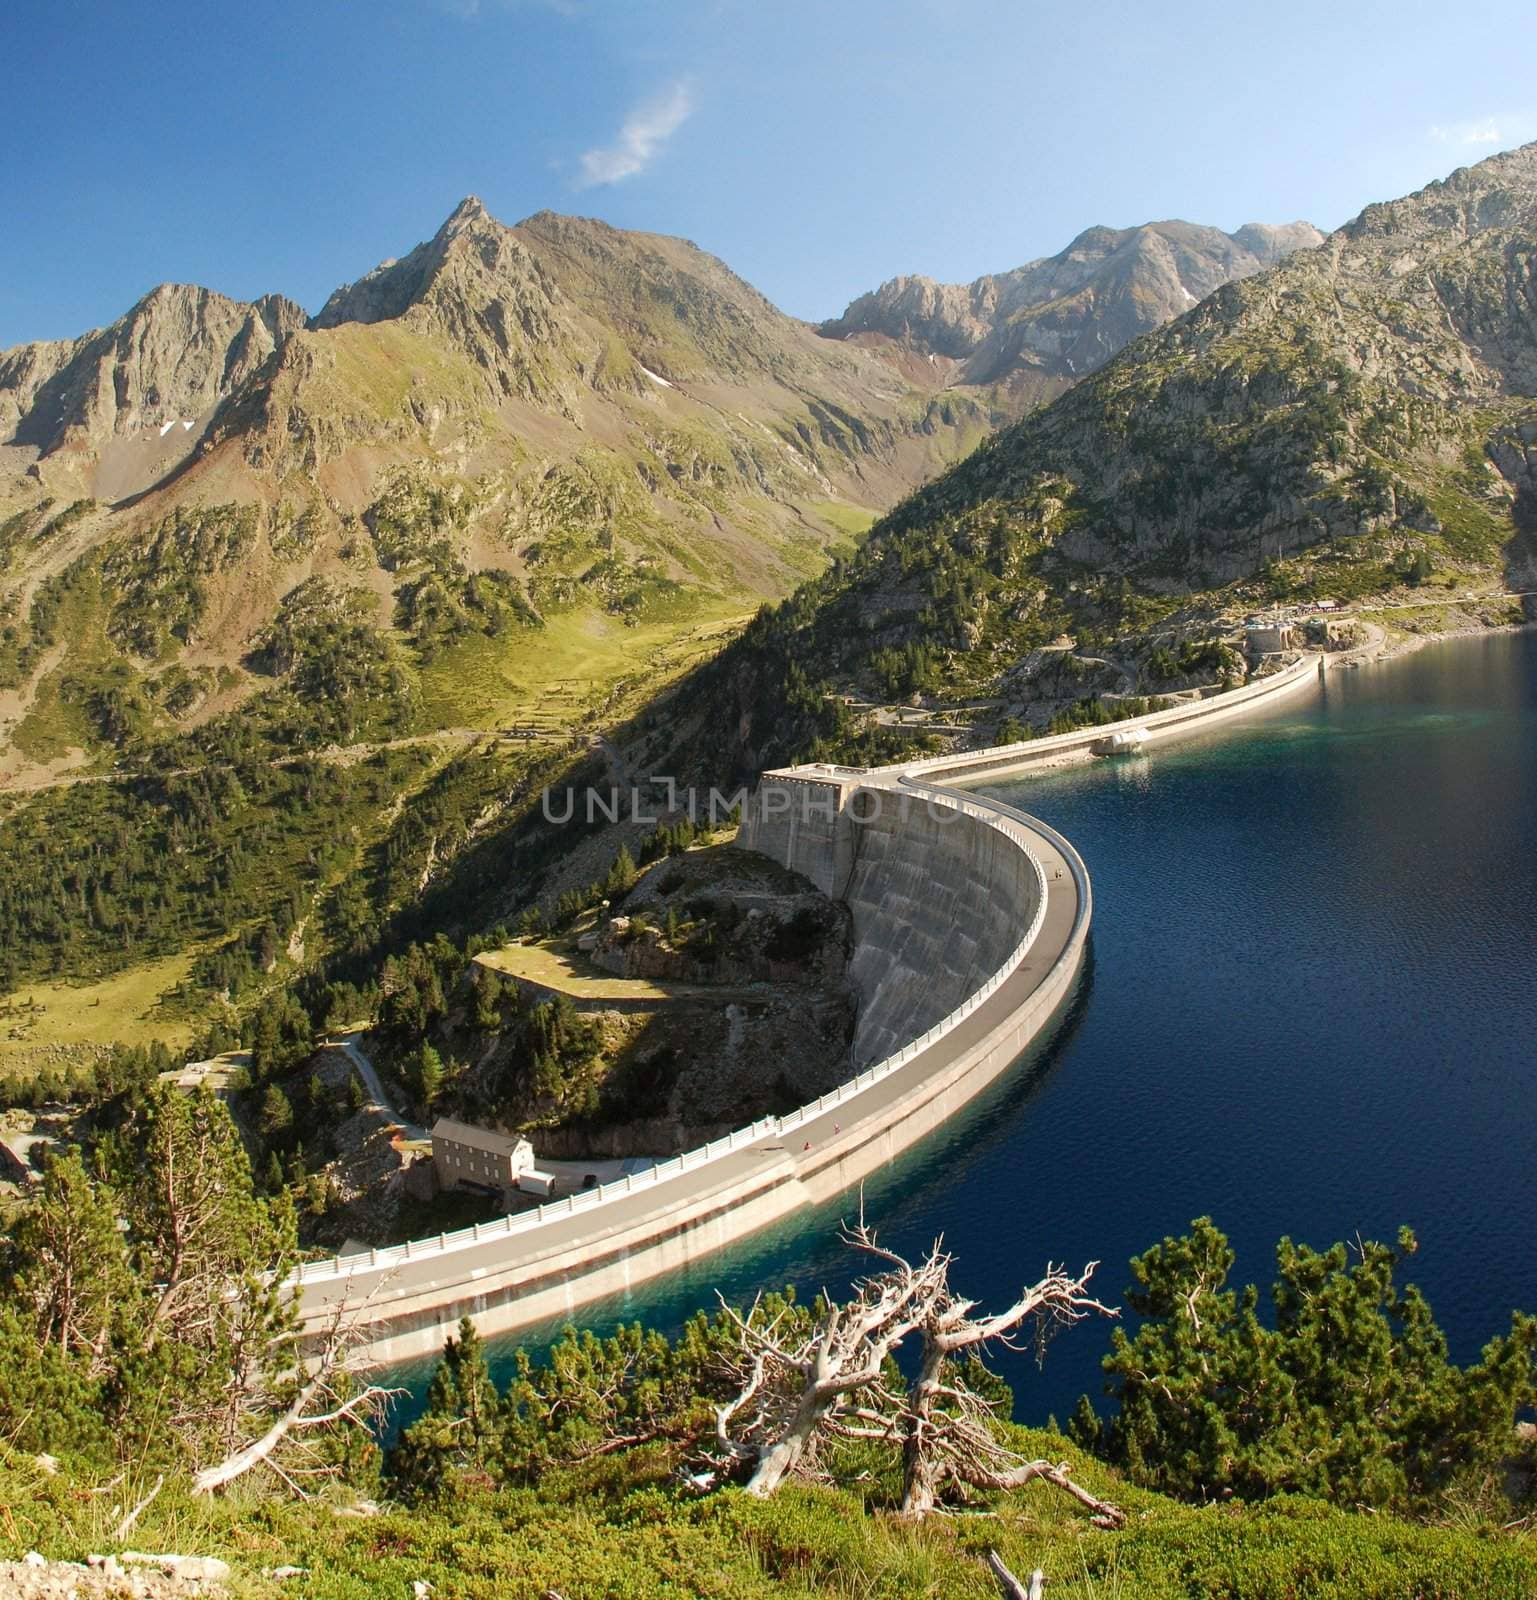 Lake Cap-de-Long  in French Hautes-Pyrenees, At an elevation of 2161 m its 130 deap. Its created by grate dam used for hydroelectric energy station.